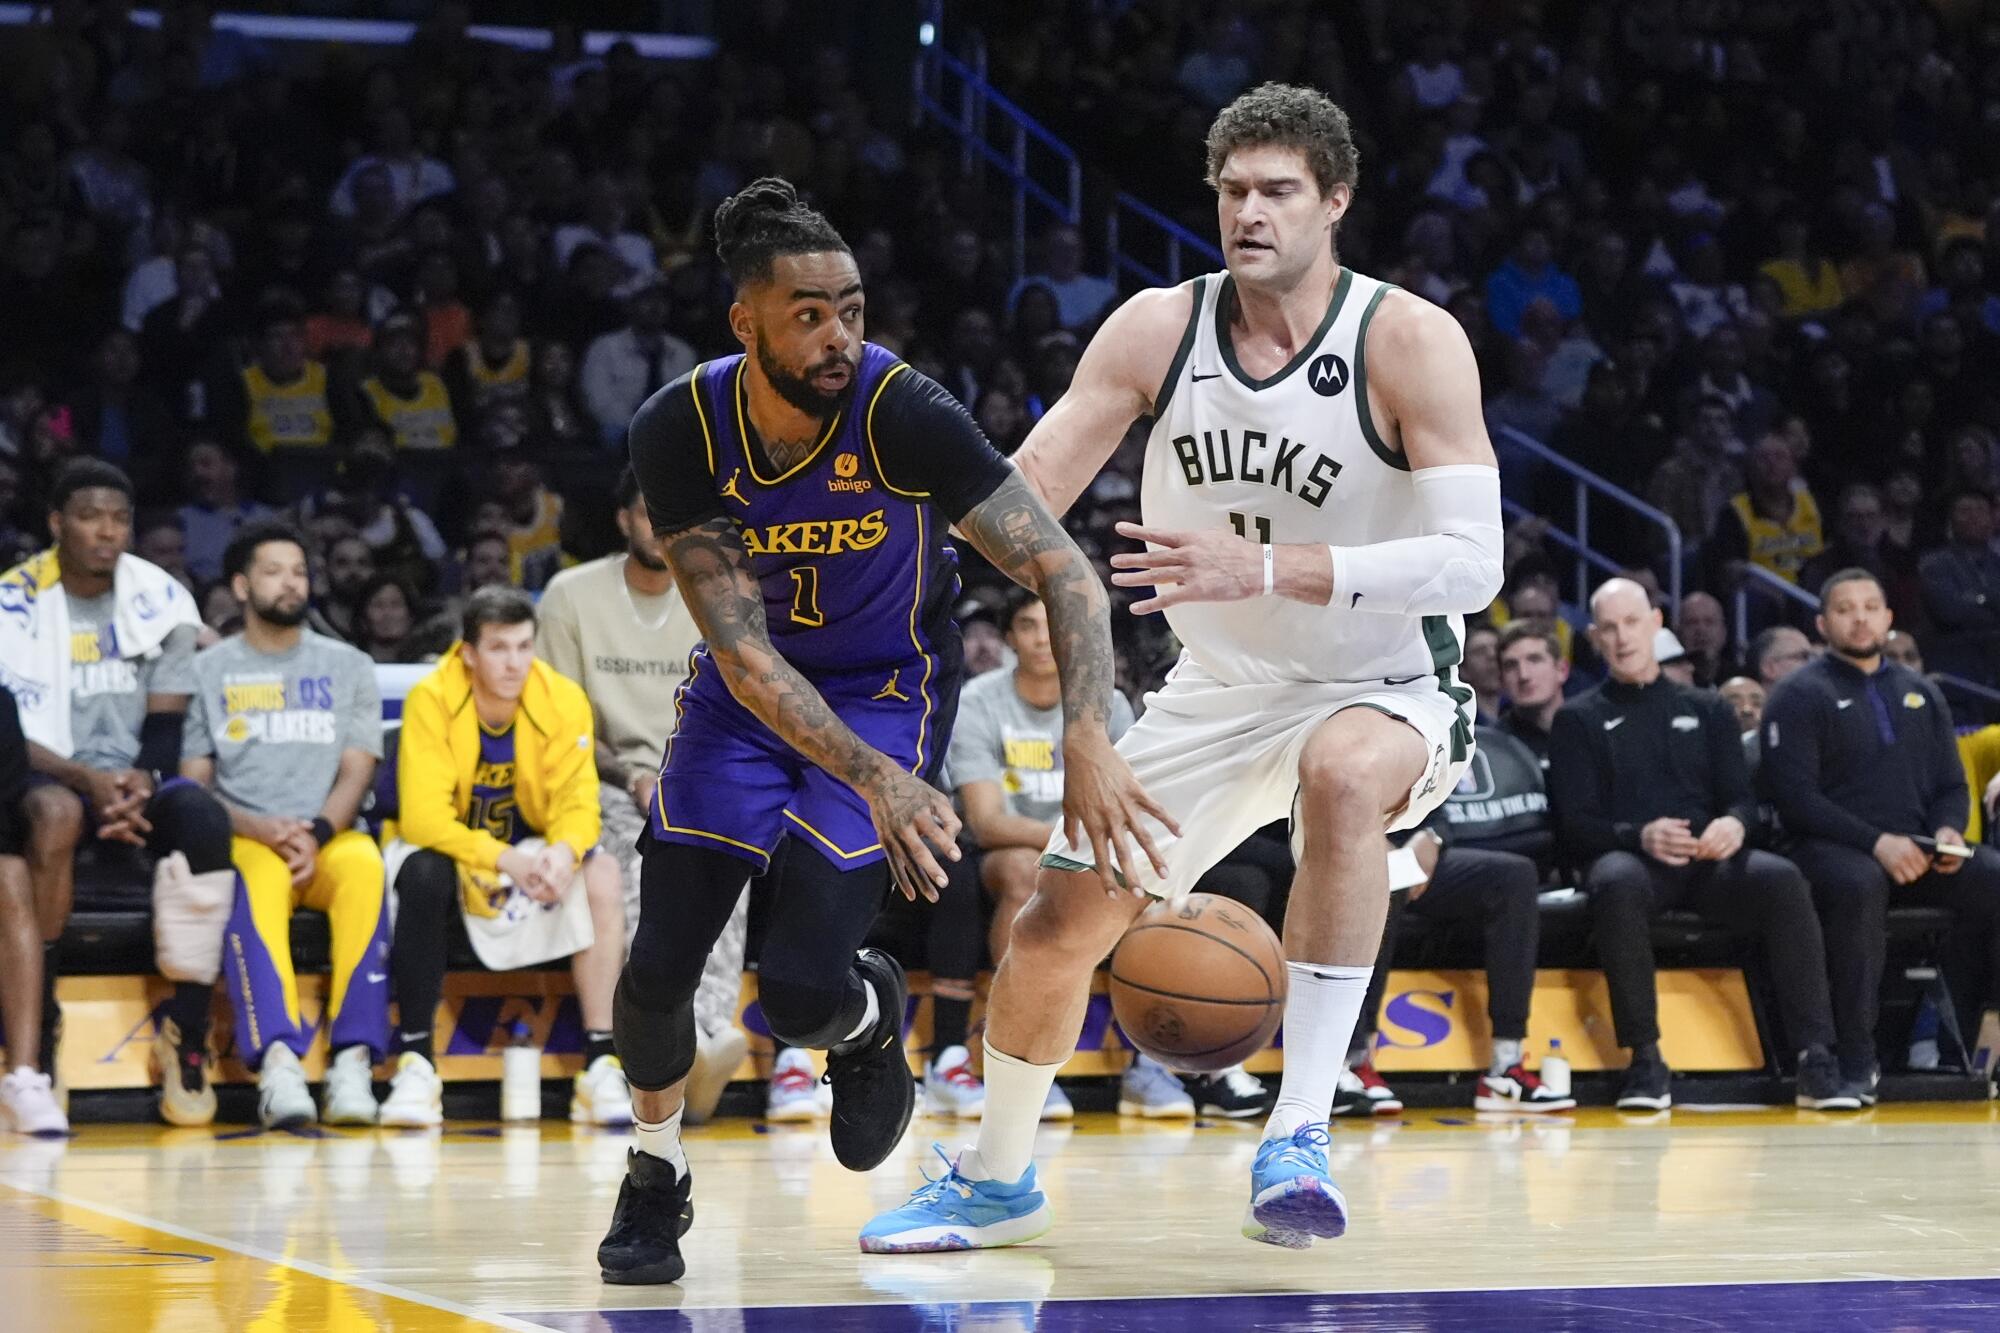 Lakers guard D'Angelo Russell, left, slips a pass around Bucks center Brook Lopez during the first half Friday night.